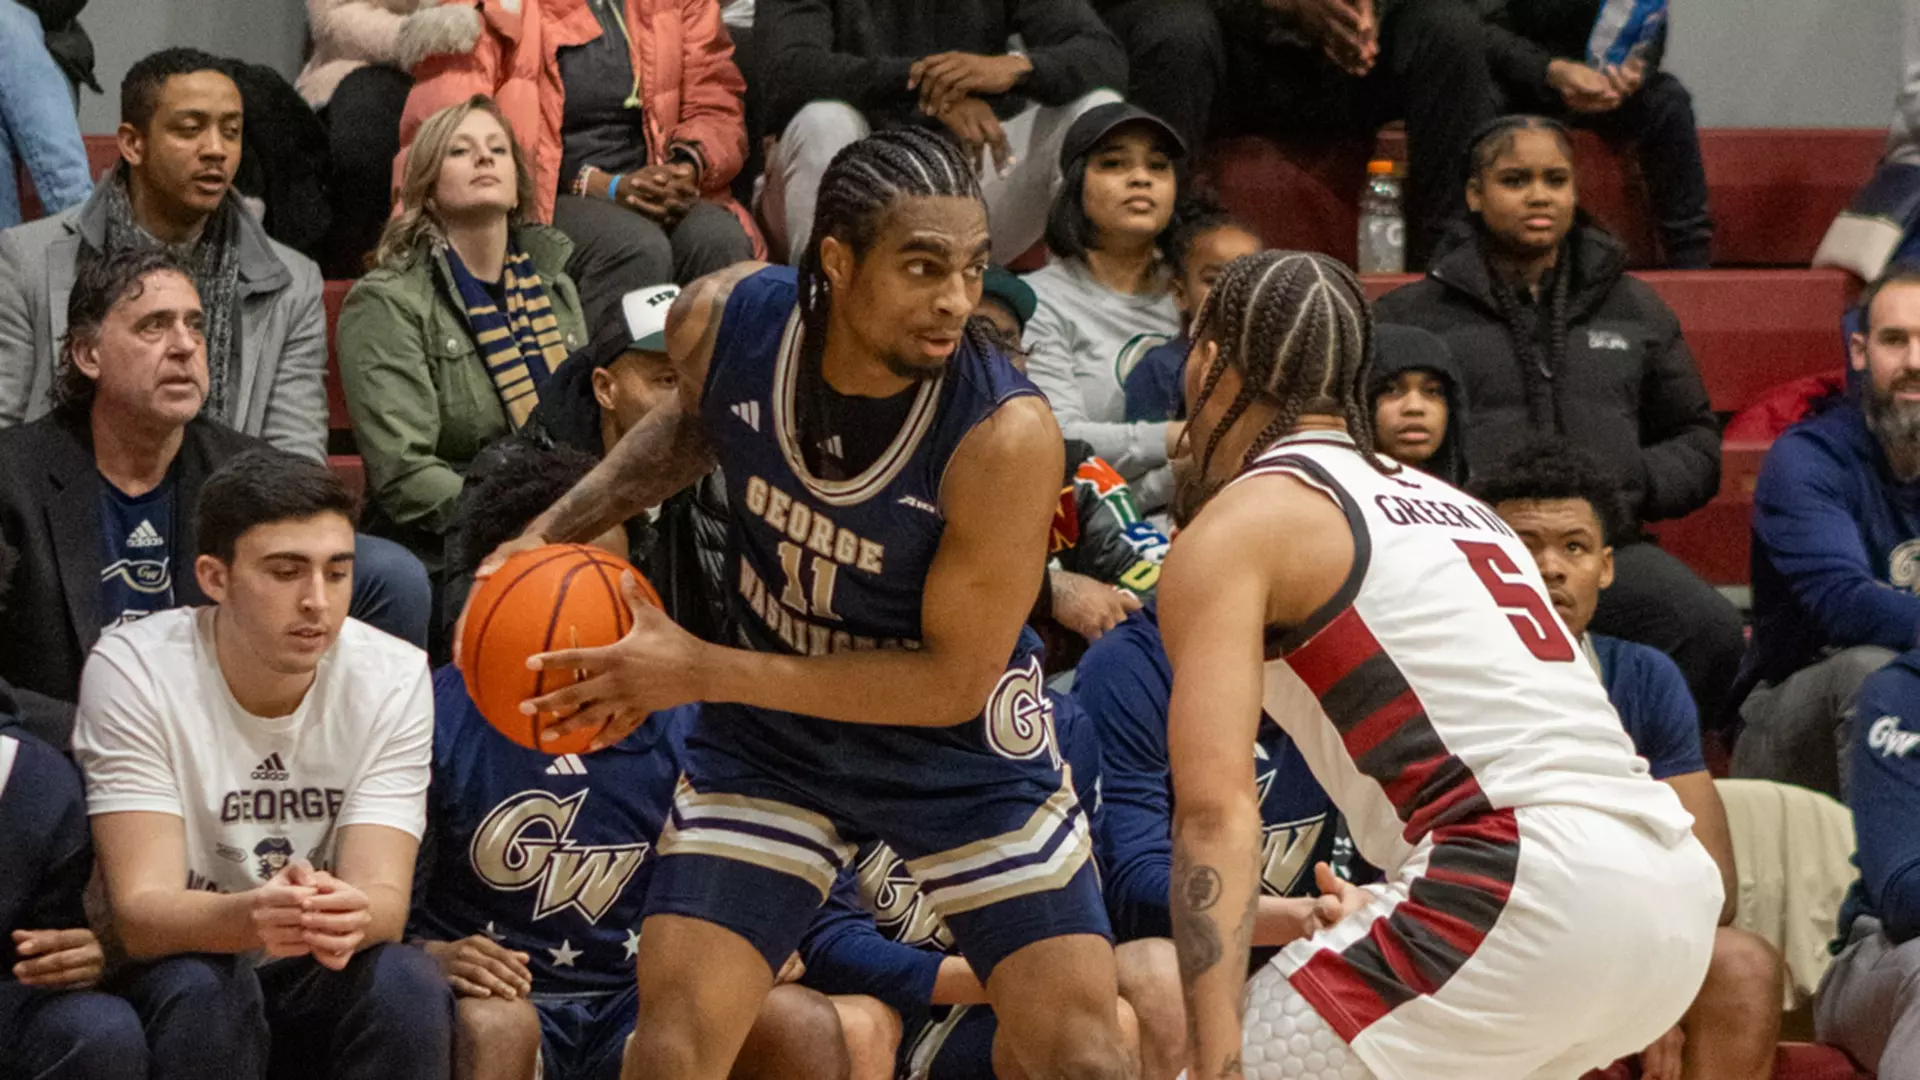 Men’s Basketball Loses Ninth Straight in Close Battle with St. Joe’s